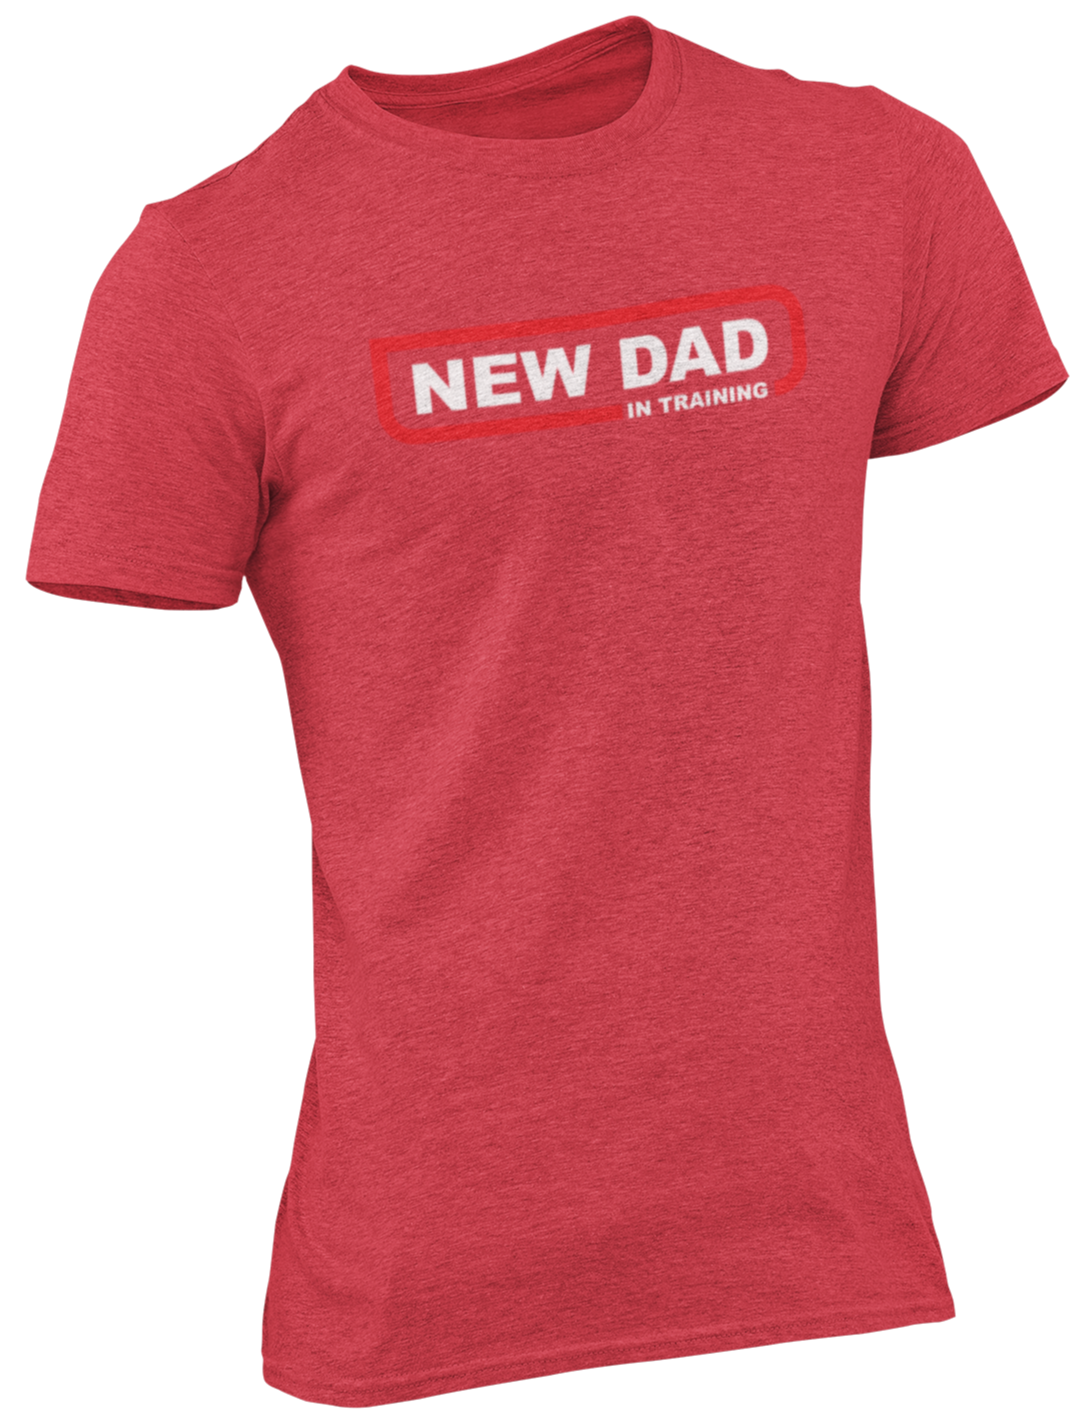 New Dad in Training Tee